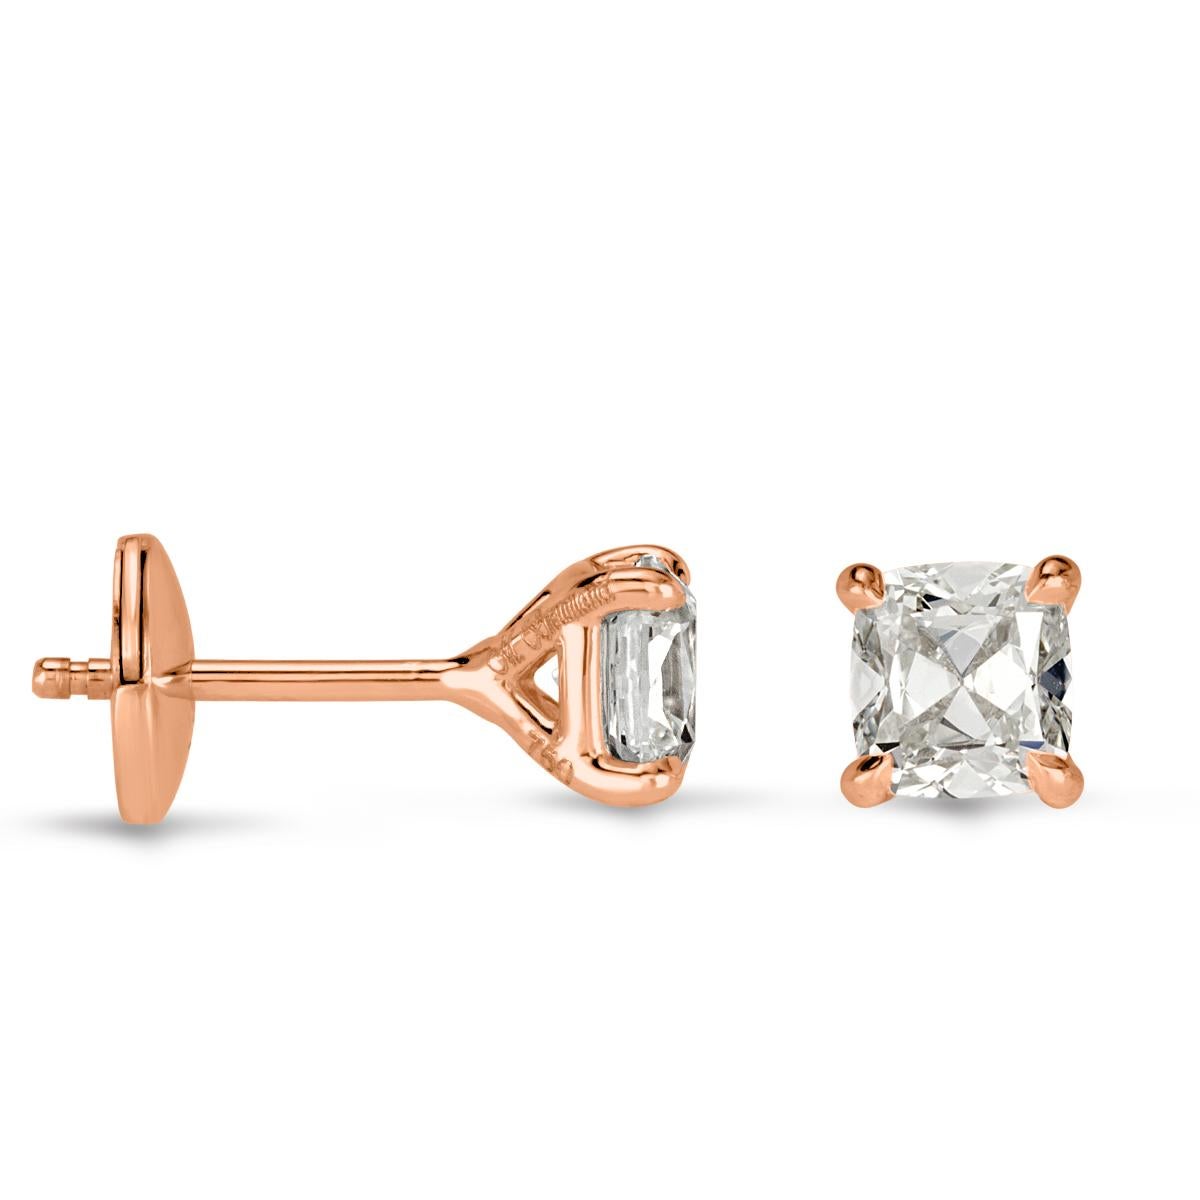 This stunning pair of diamond stud earrings showcases two ravishing old Mine cut diamonds with a total weight of 1.00ct. They are graded at F-G in color, VS1-VS2 in clarity and set in a classic four prong, 18k rose gold setting.
